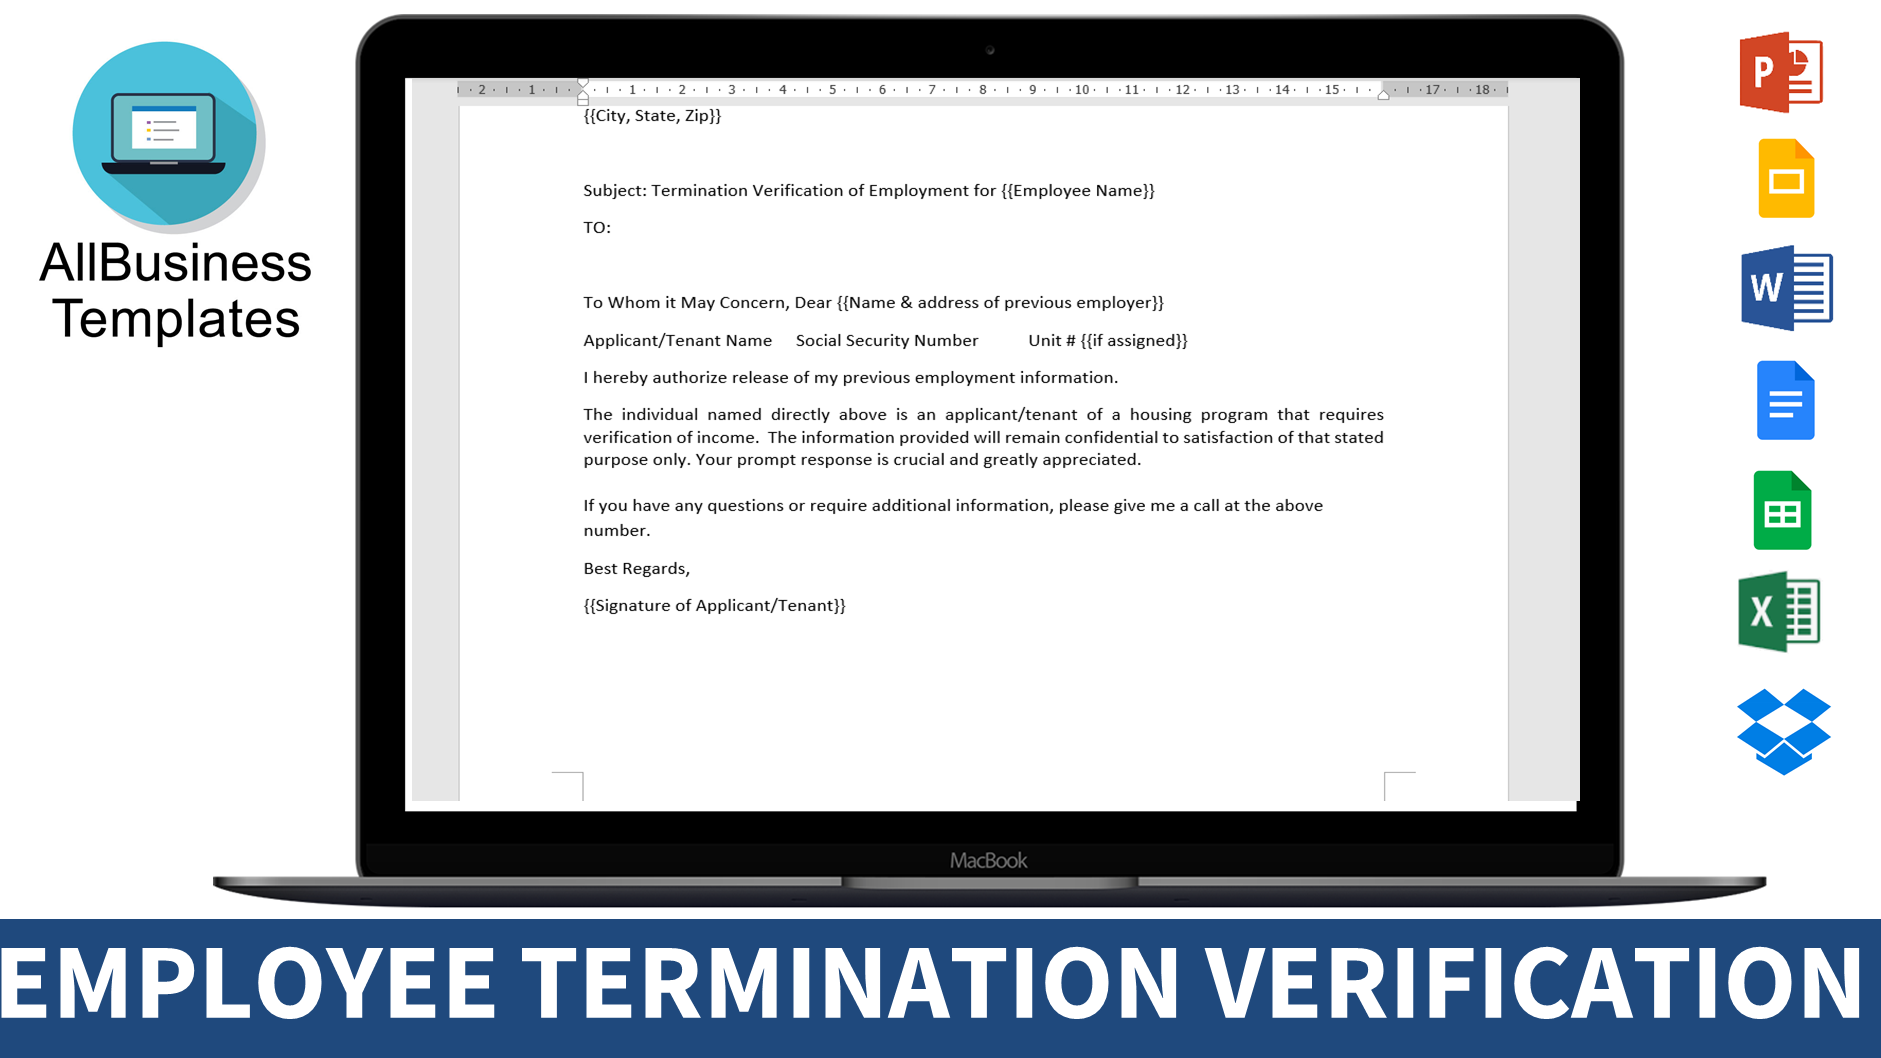 Employee Termination Verification Letter | Templates at ...